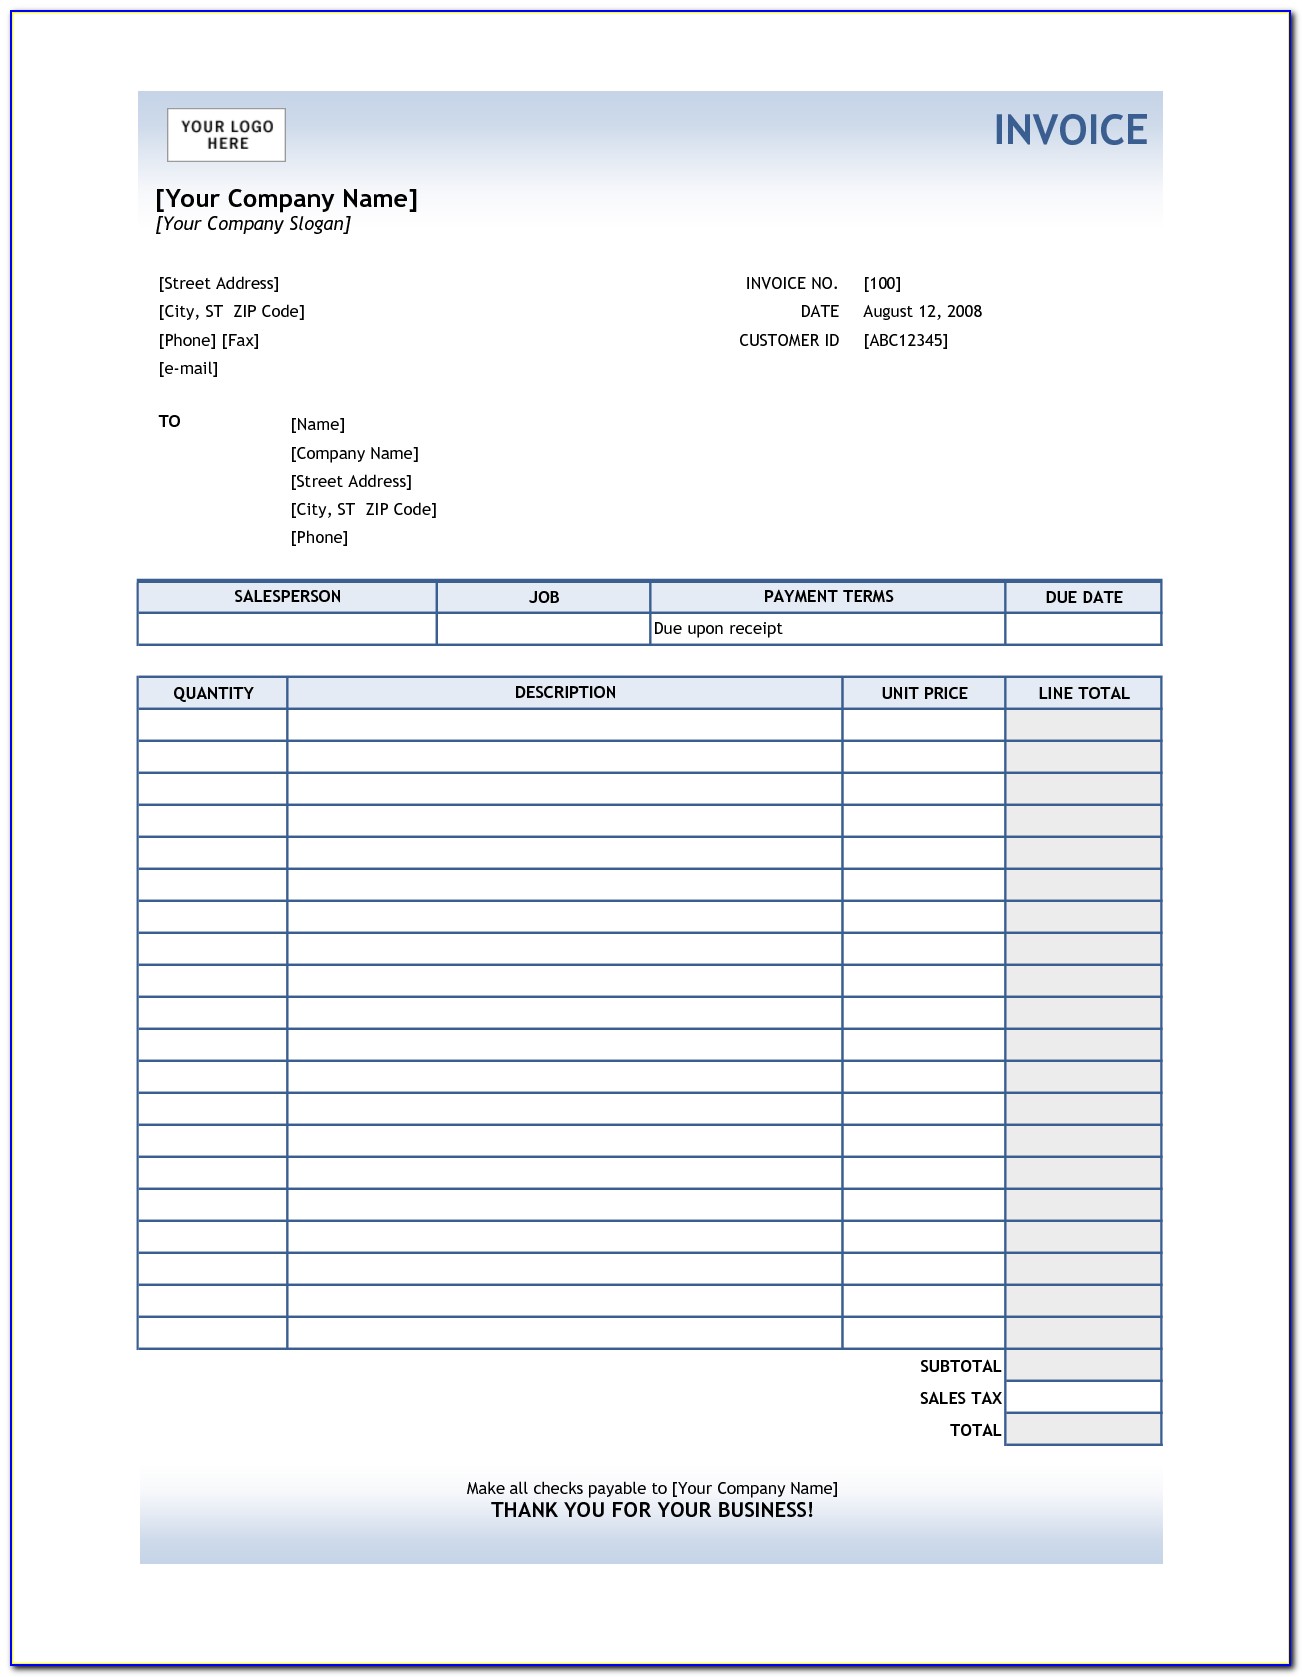 Grant Proposal Budget Template Excel